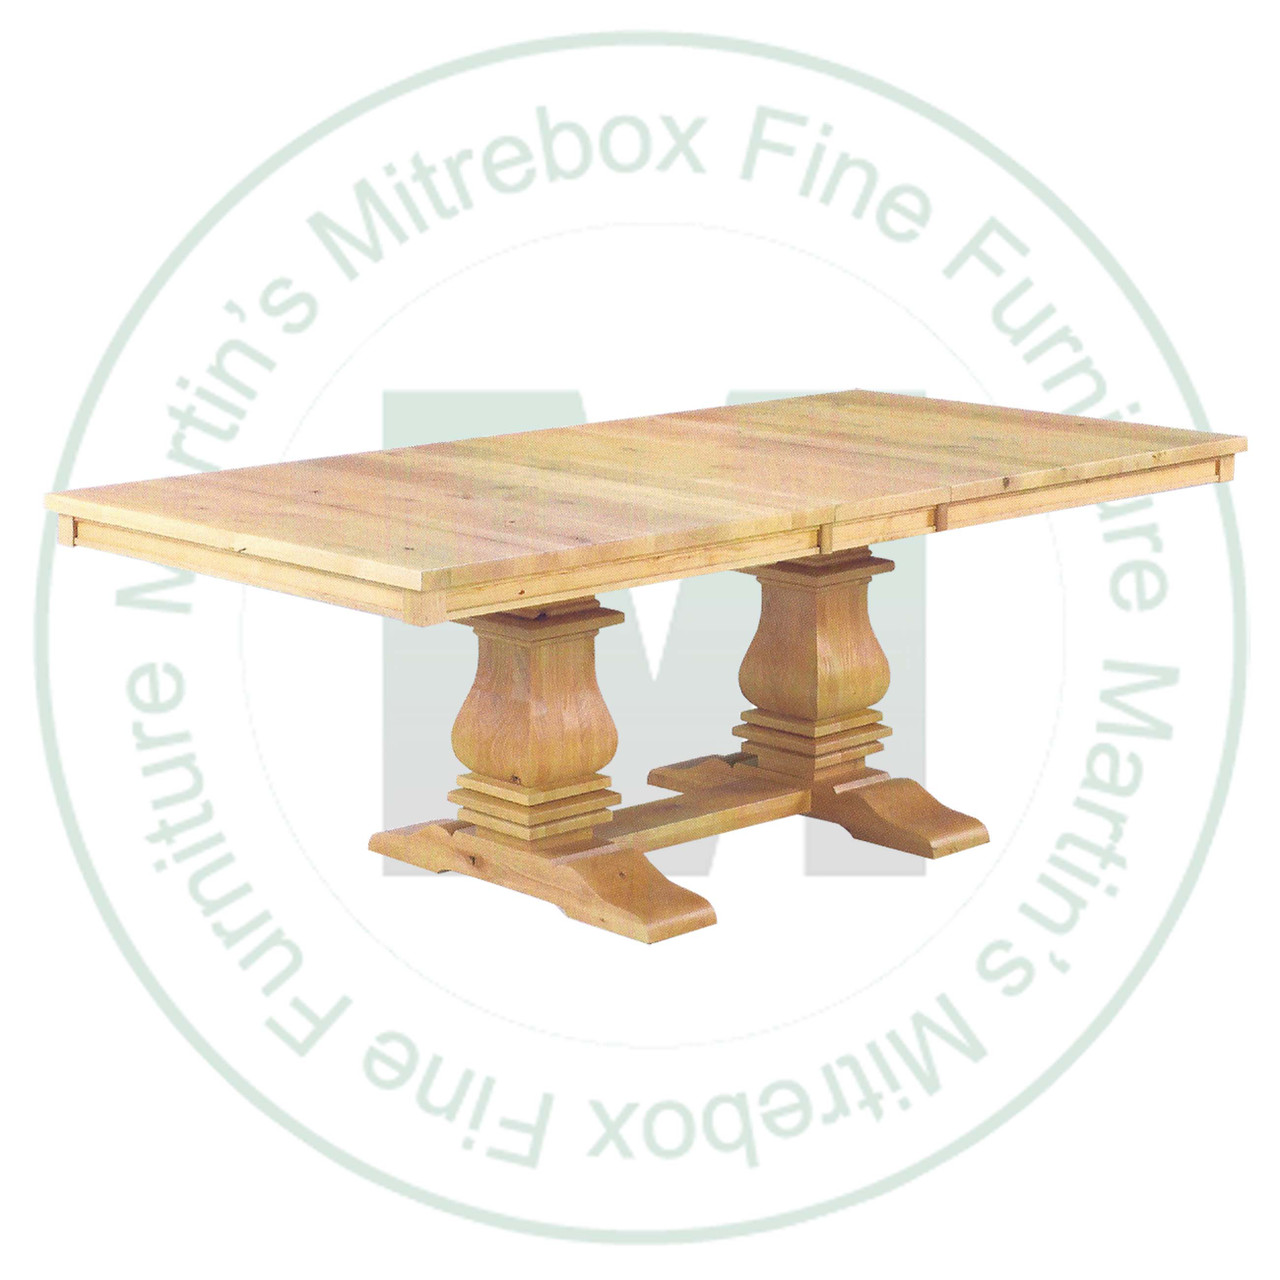 Maple Mediterranean Double Pedestal Table 42''D x 96''W x 30''H With 4 - 12'' Leaves. Table Has 1.25'' Thick Top